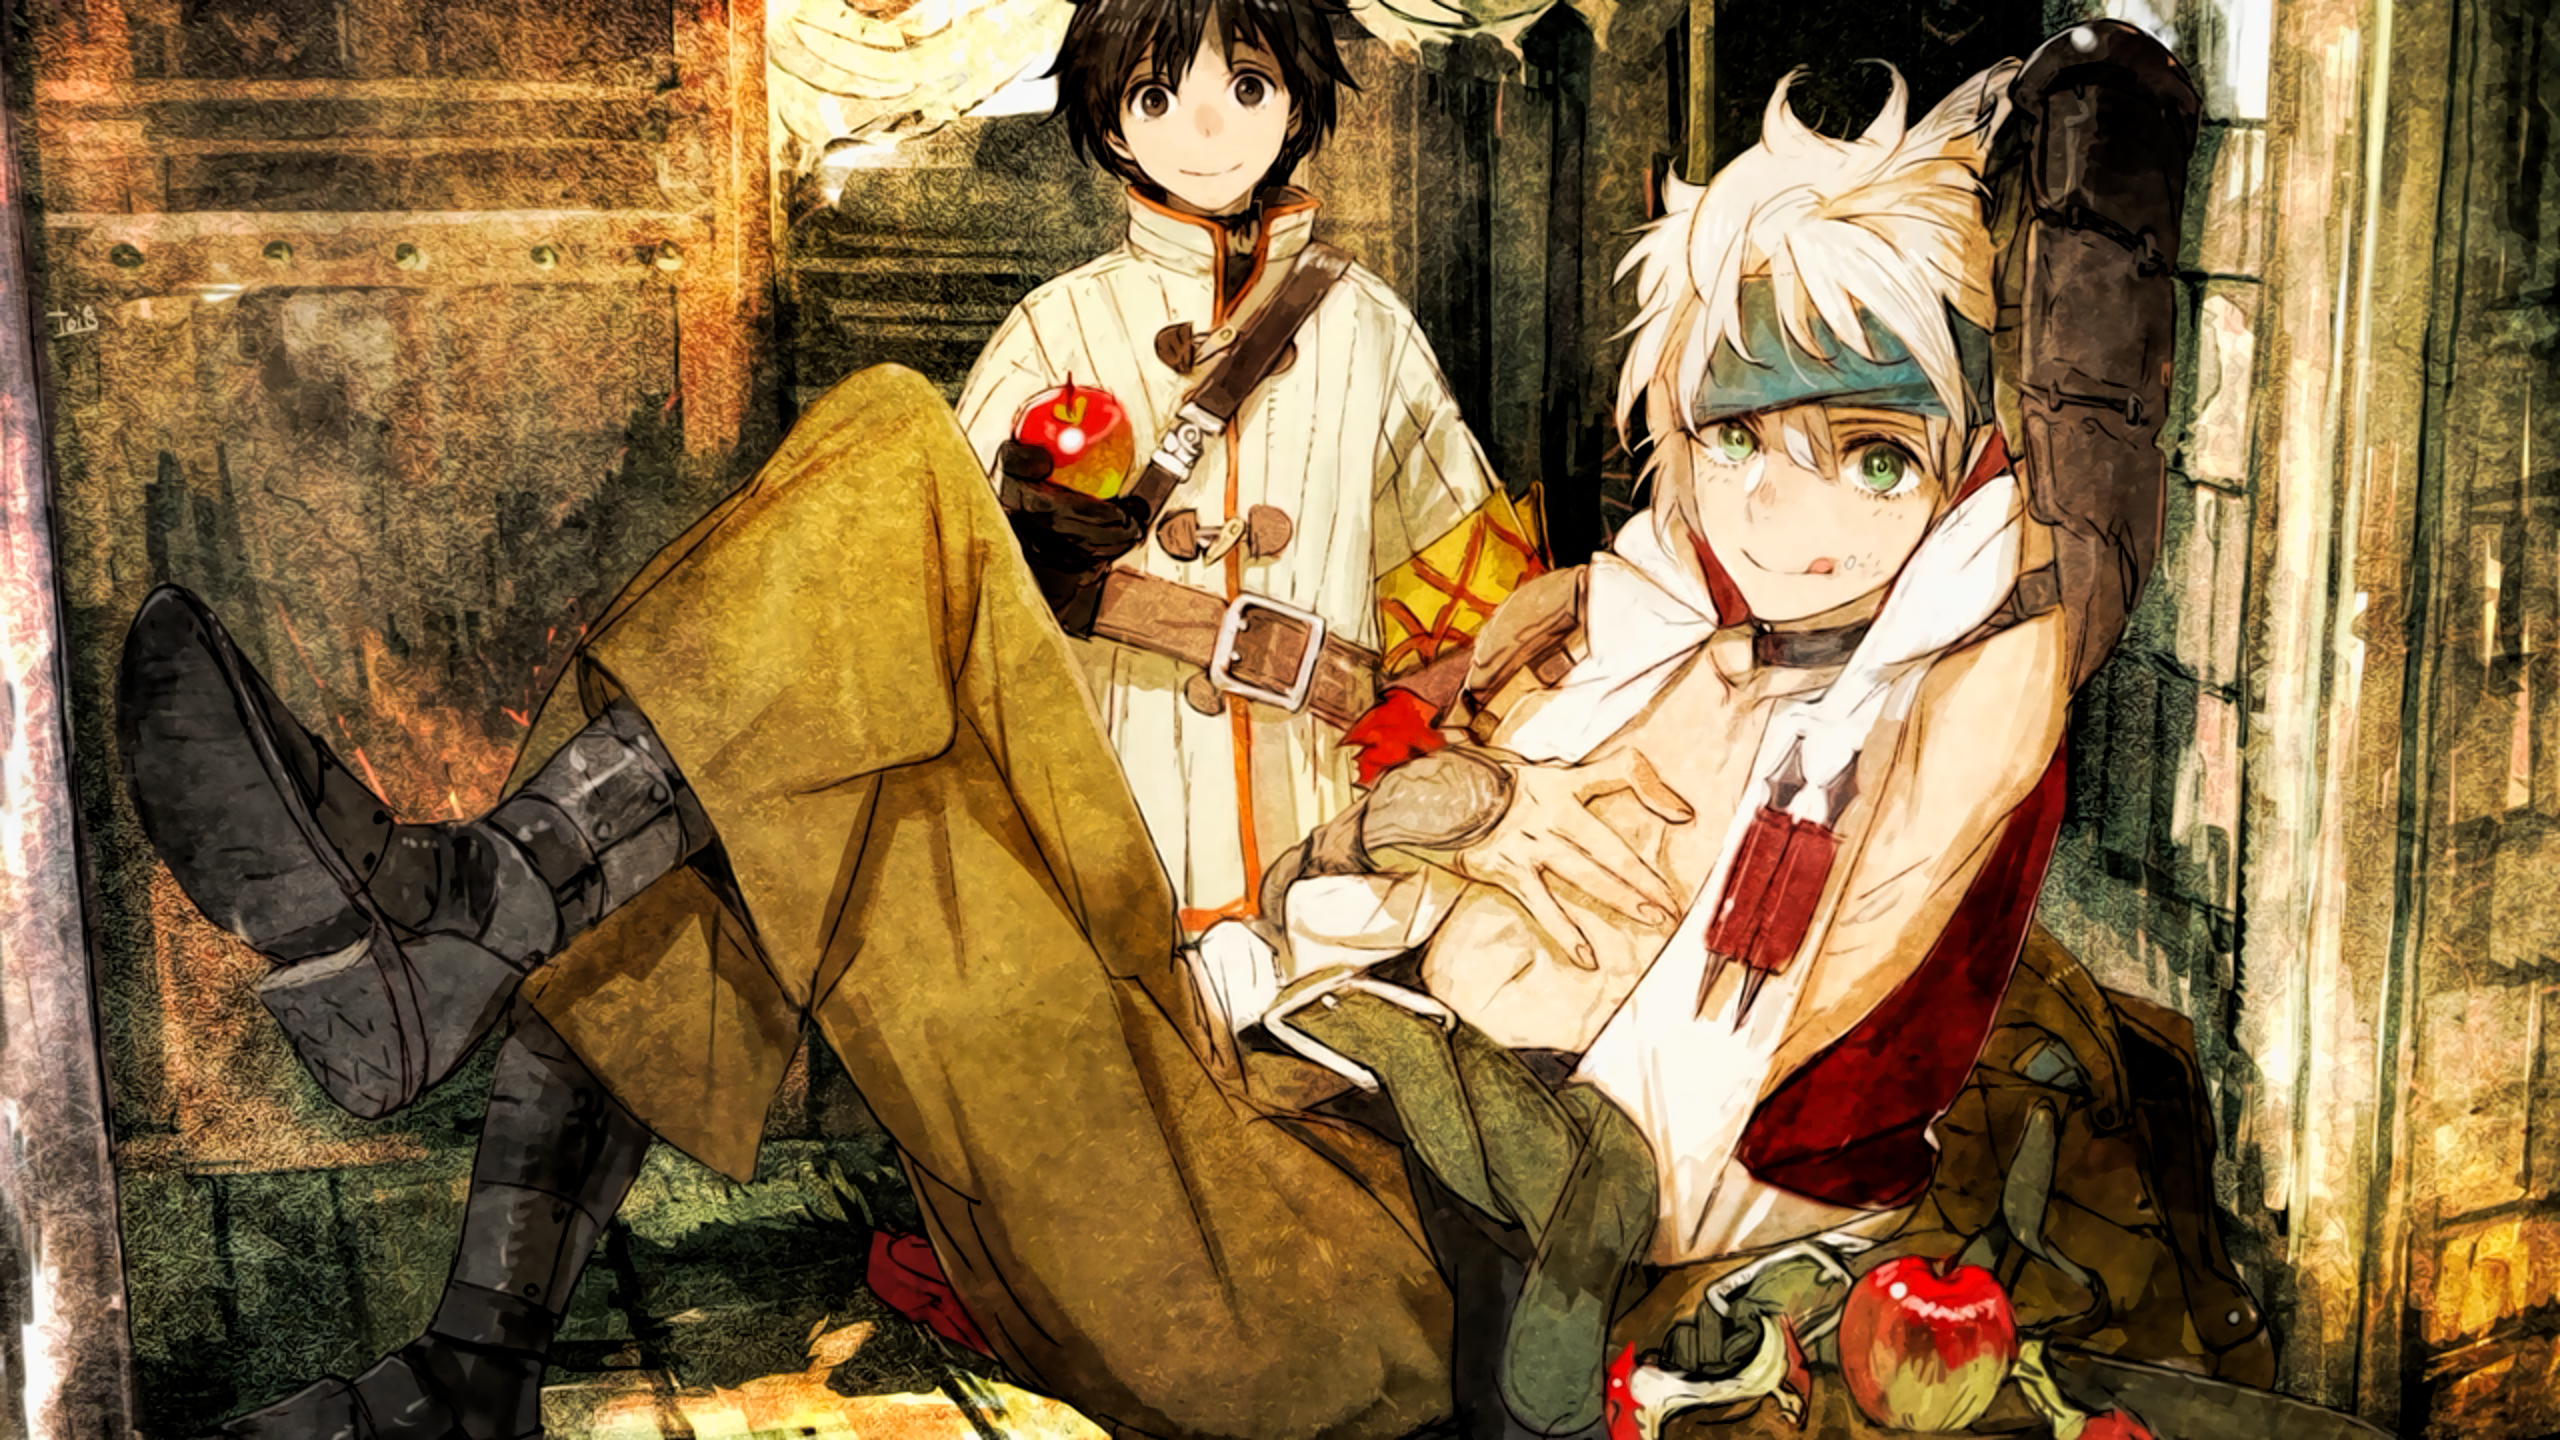 Anime Chain Chronicle: The Light of Haecceitas HD Wallpaper | Background Image